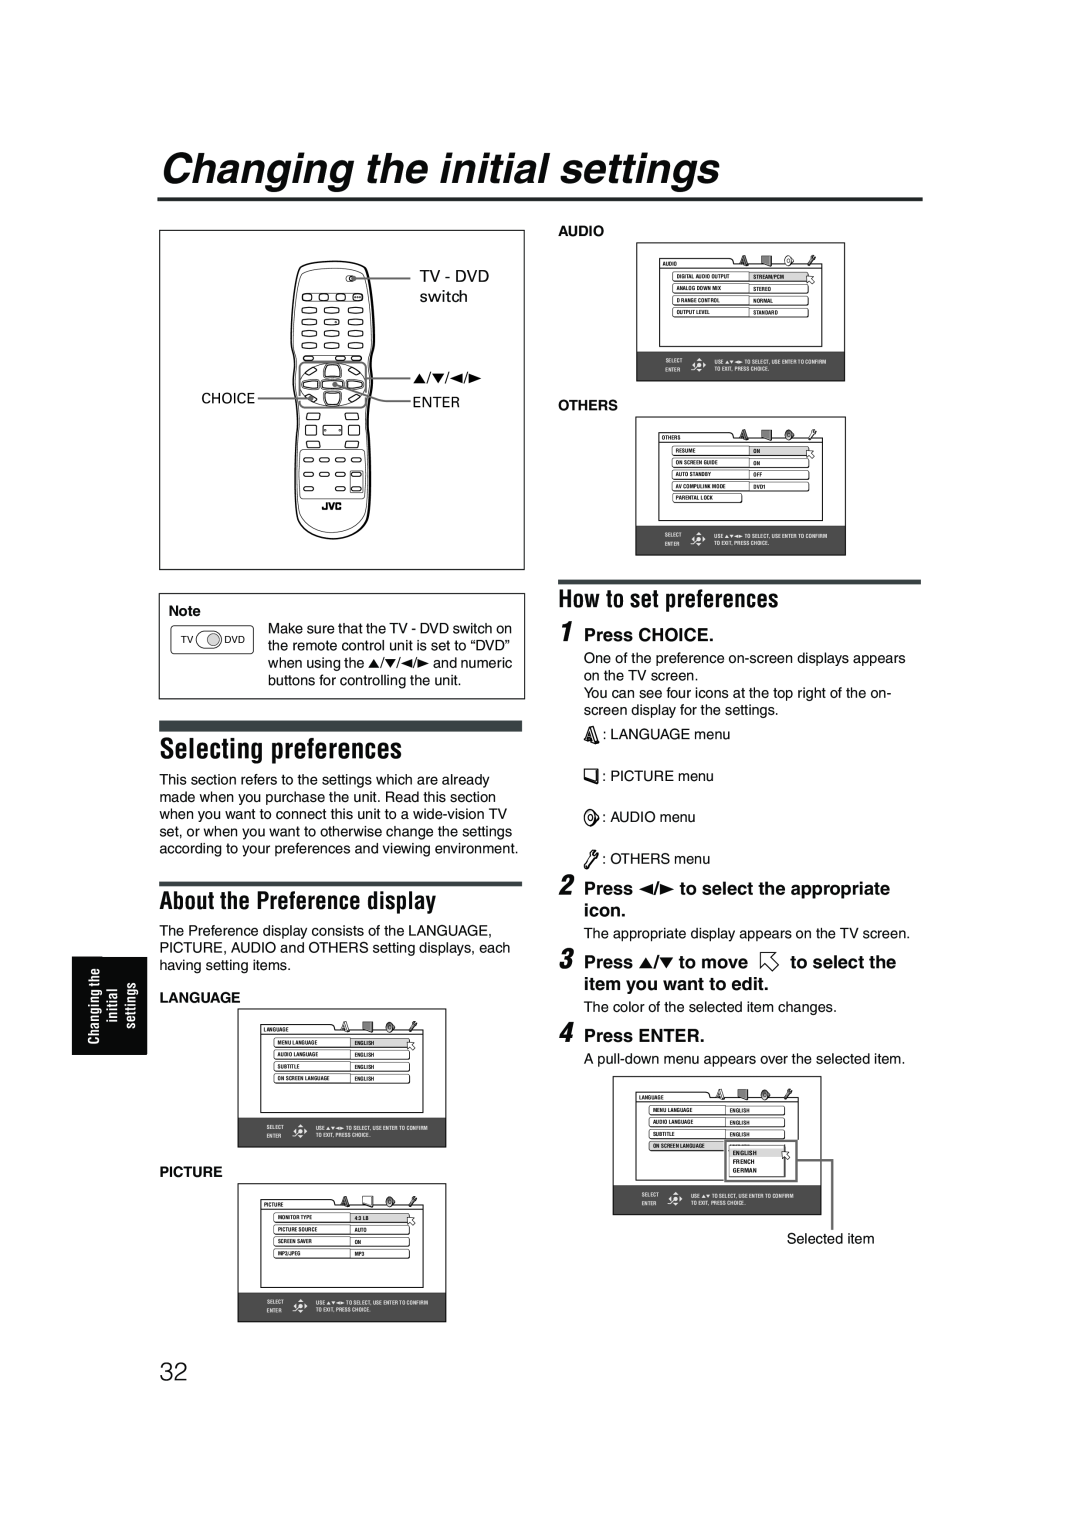 JVC LET0227-003A Changing the initial settings, Selecting preferences, How to set preferences, Press CHOICE, Press ENTER 